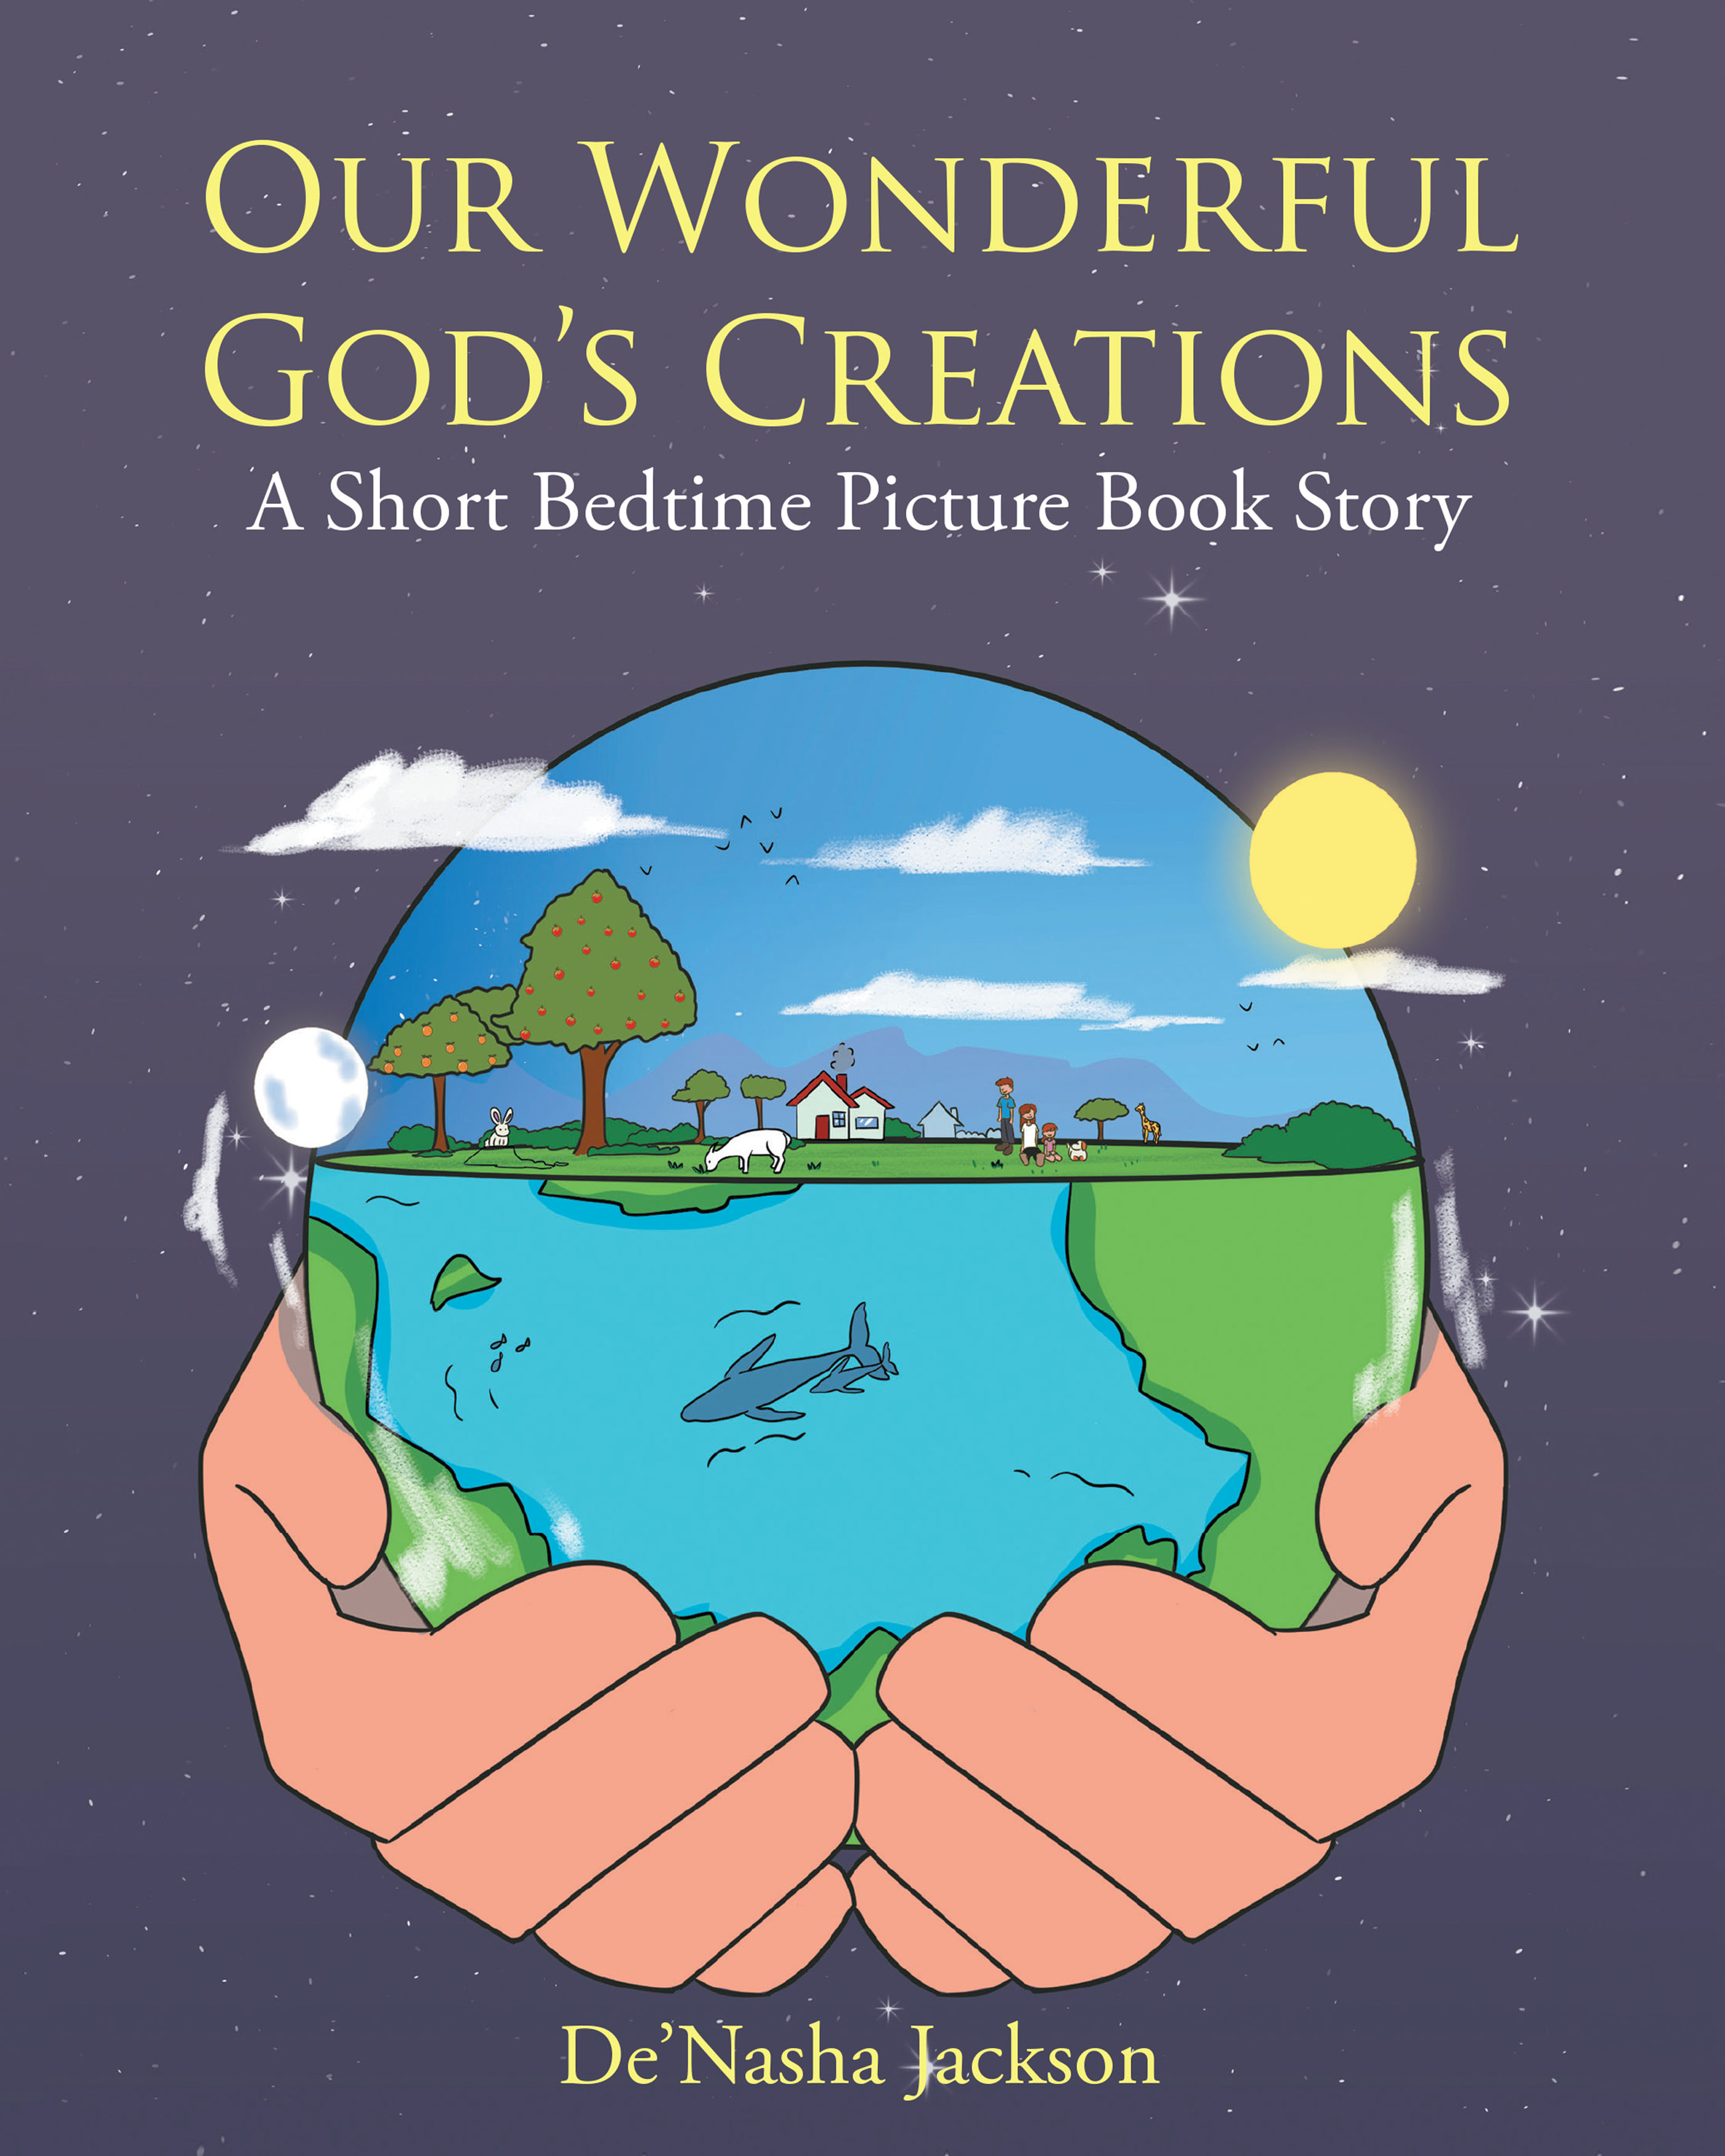 De’Nasha Jackson’s Newly Released "Our Wonderful God’s Creations: A Short Bedtime Picture Book Story" is an Easy-to-Follow Exploration of the Creation Story